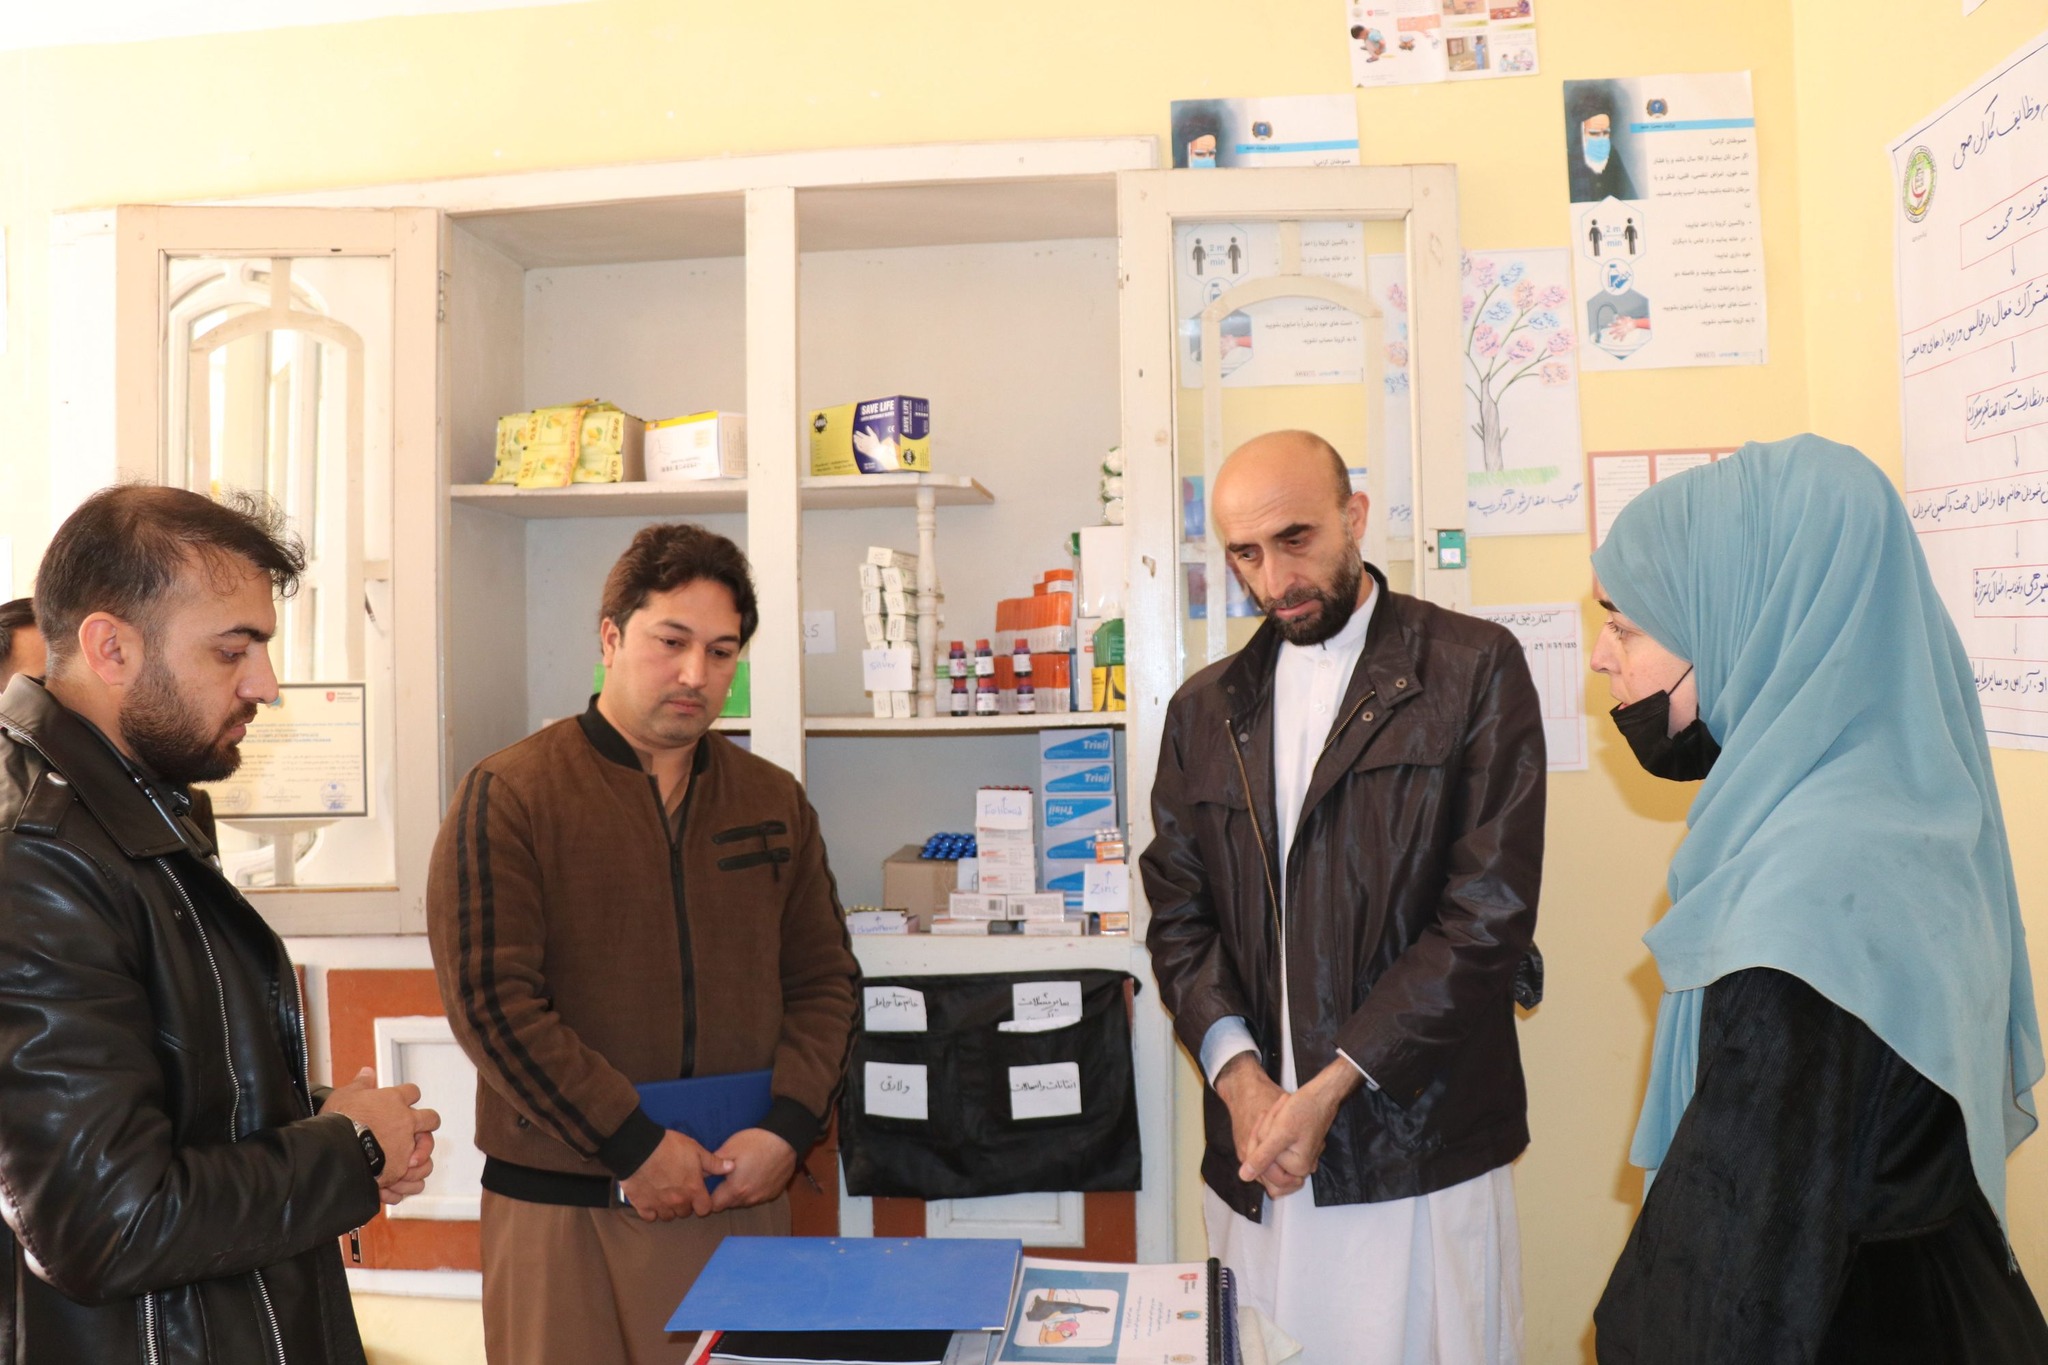 MI-Donor visit from Health Project in Mazar-e-Sharif